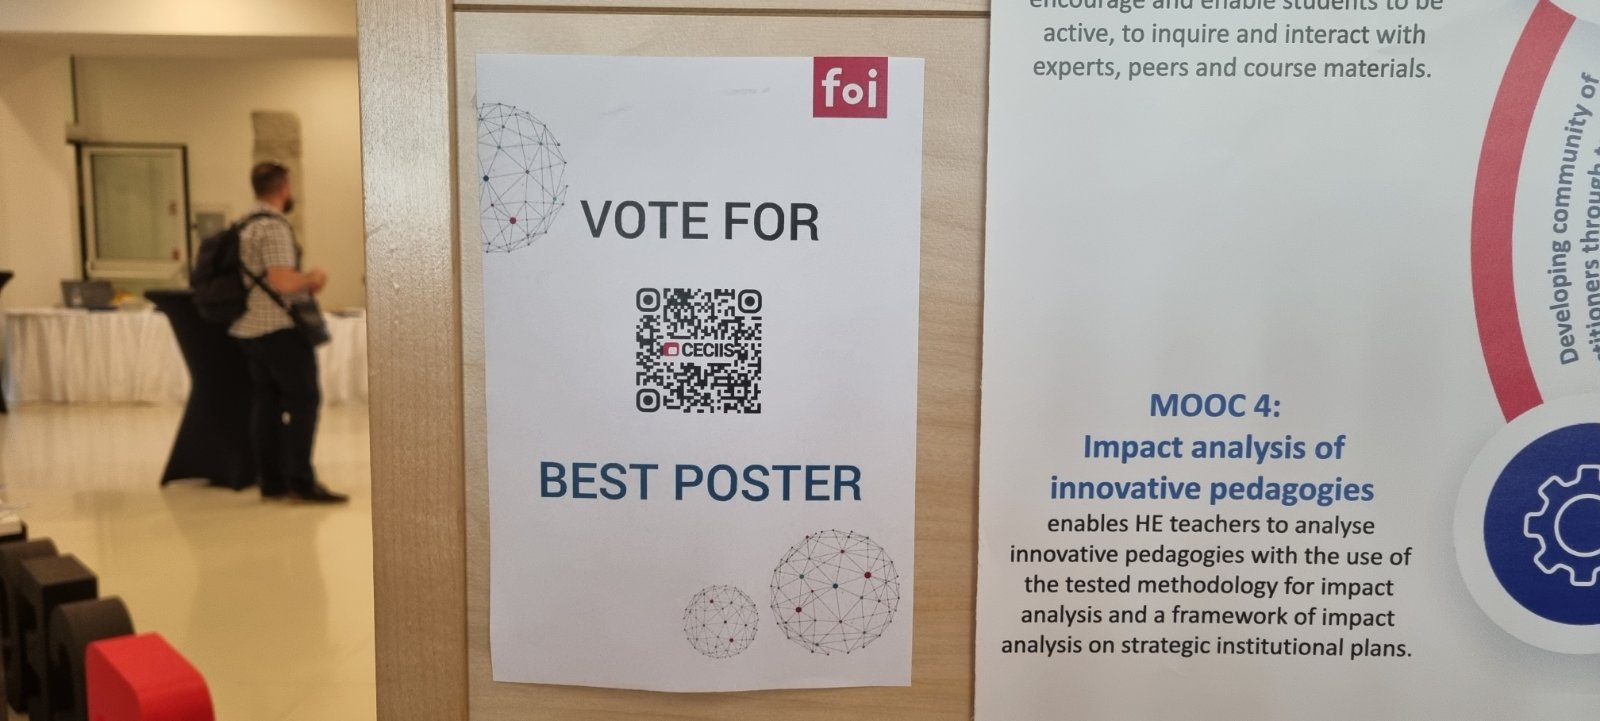 poster section qr code voting